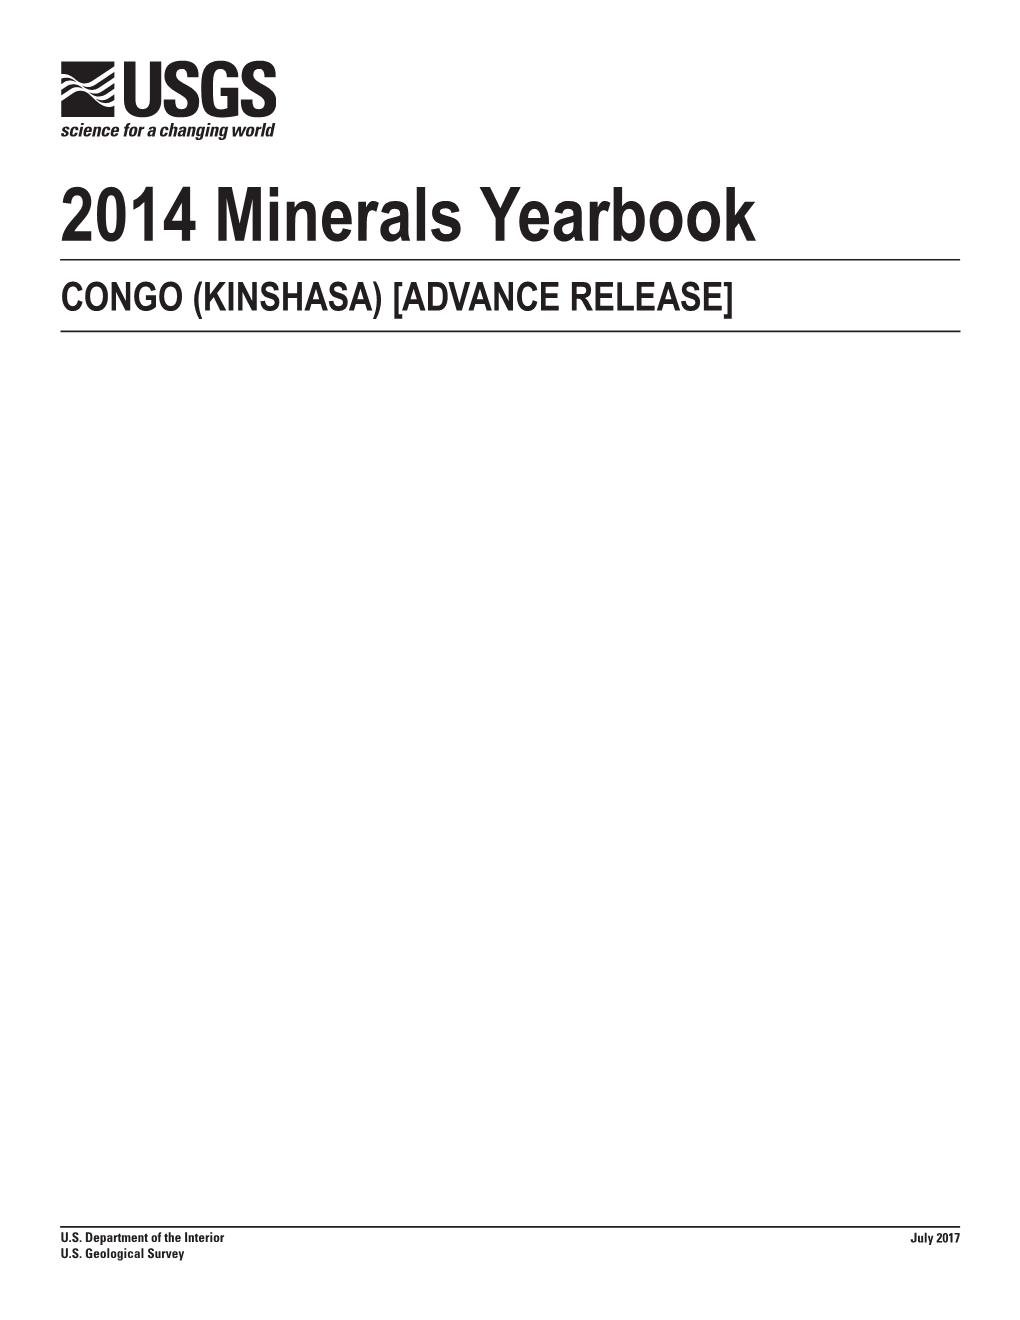 The Mineral Industry of Congo (Kinshasa) in 2014